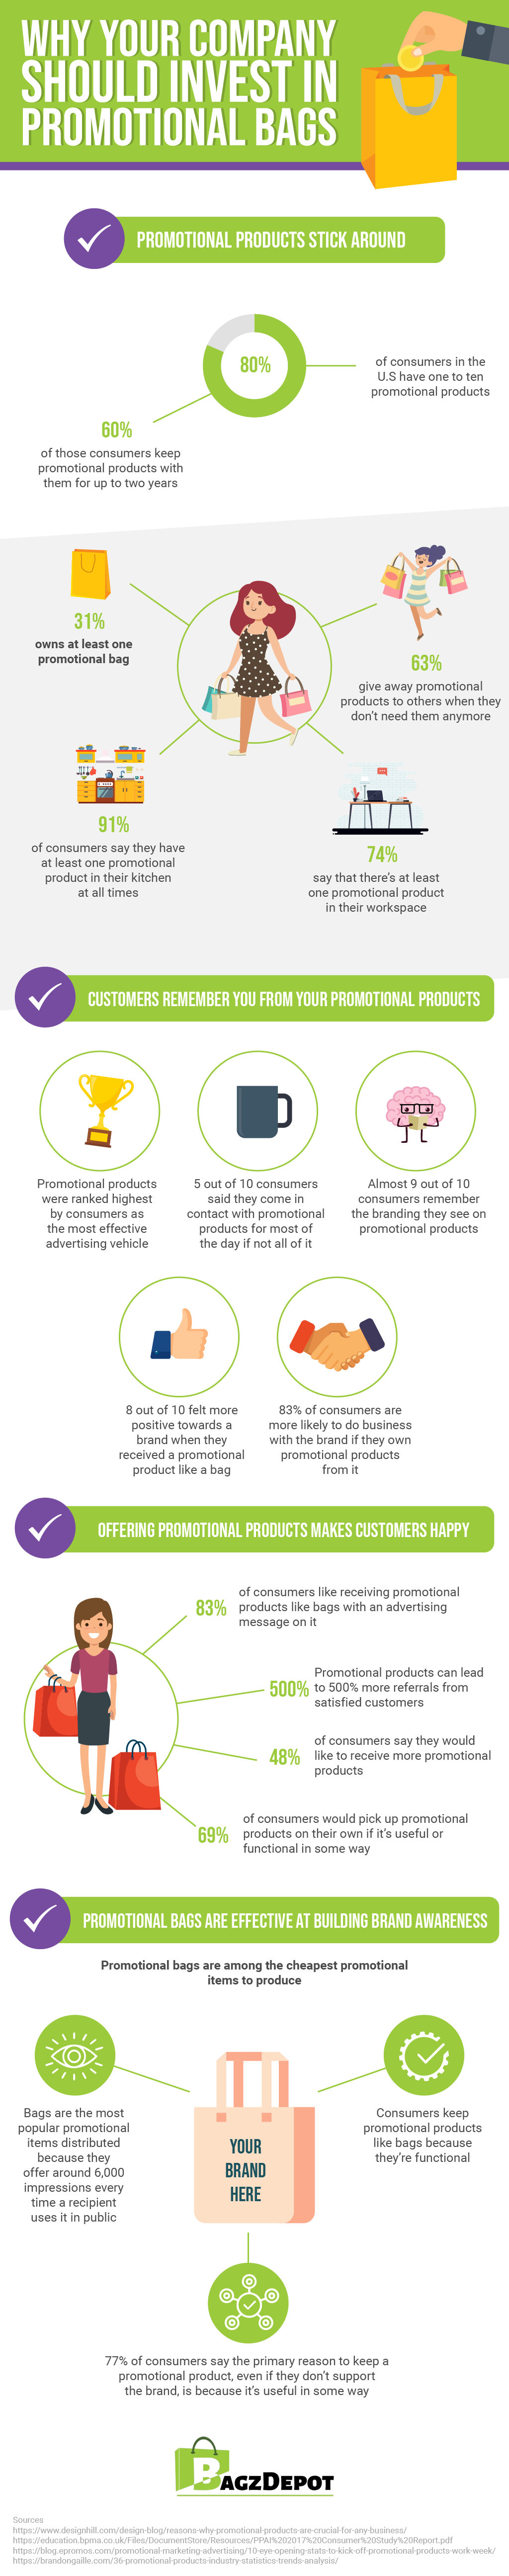 Why Your Company Should Invest in Promotional Bags